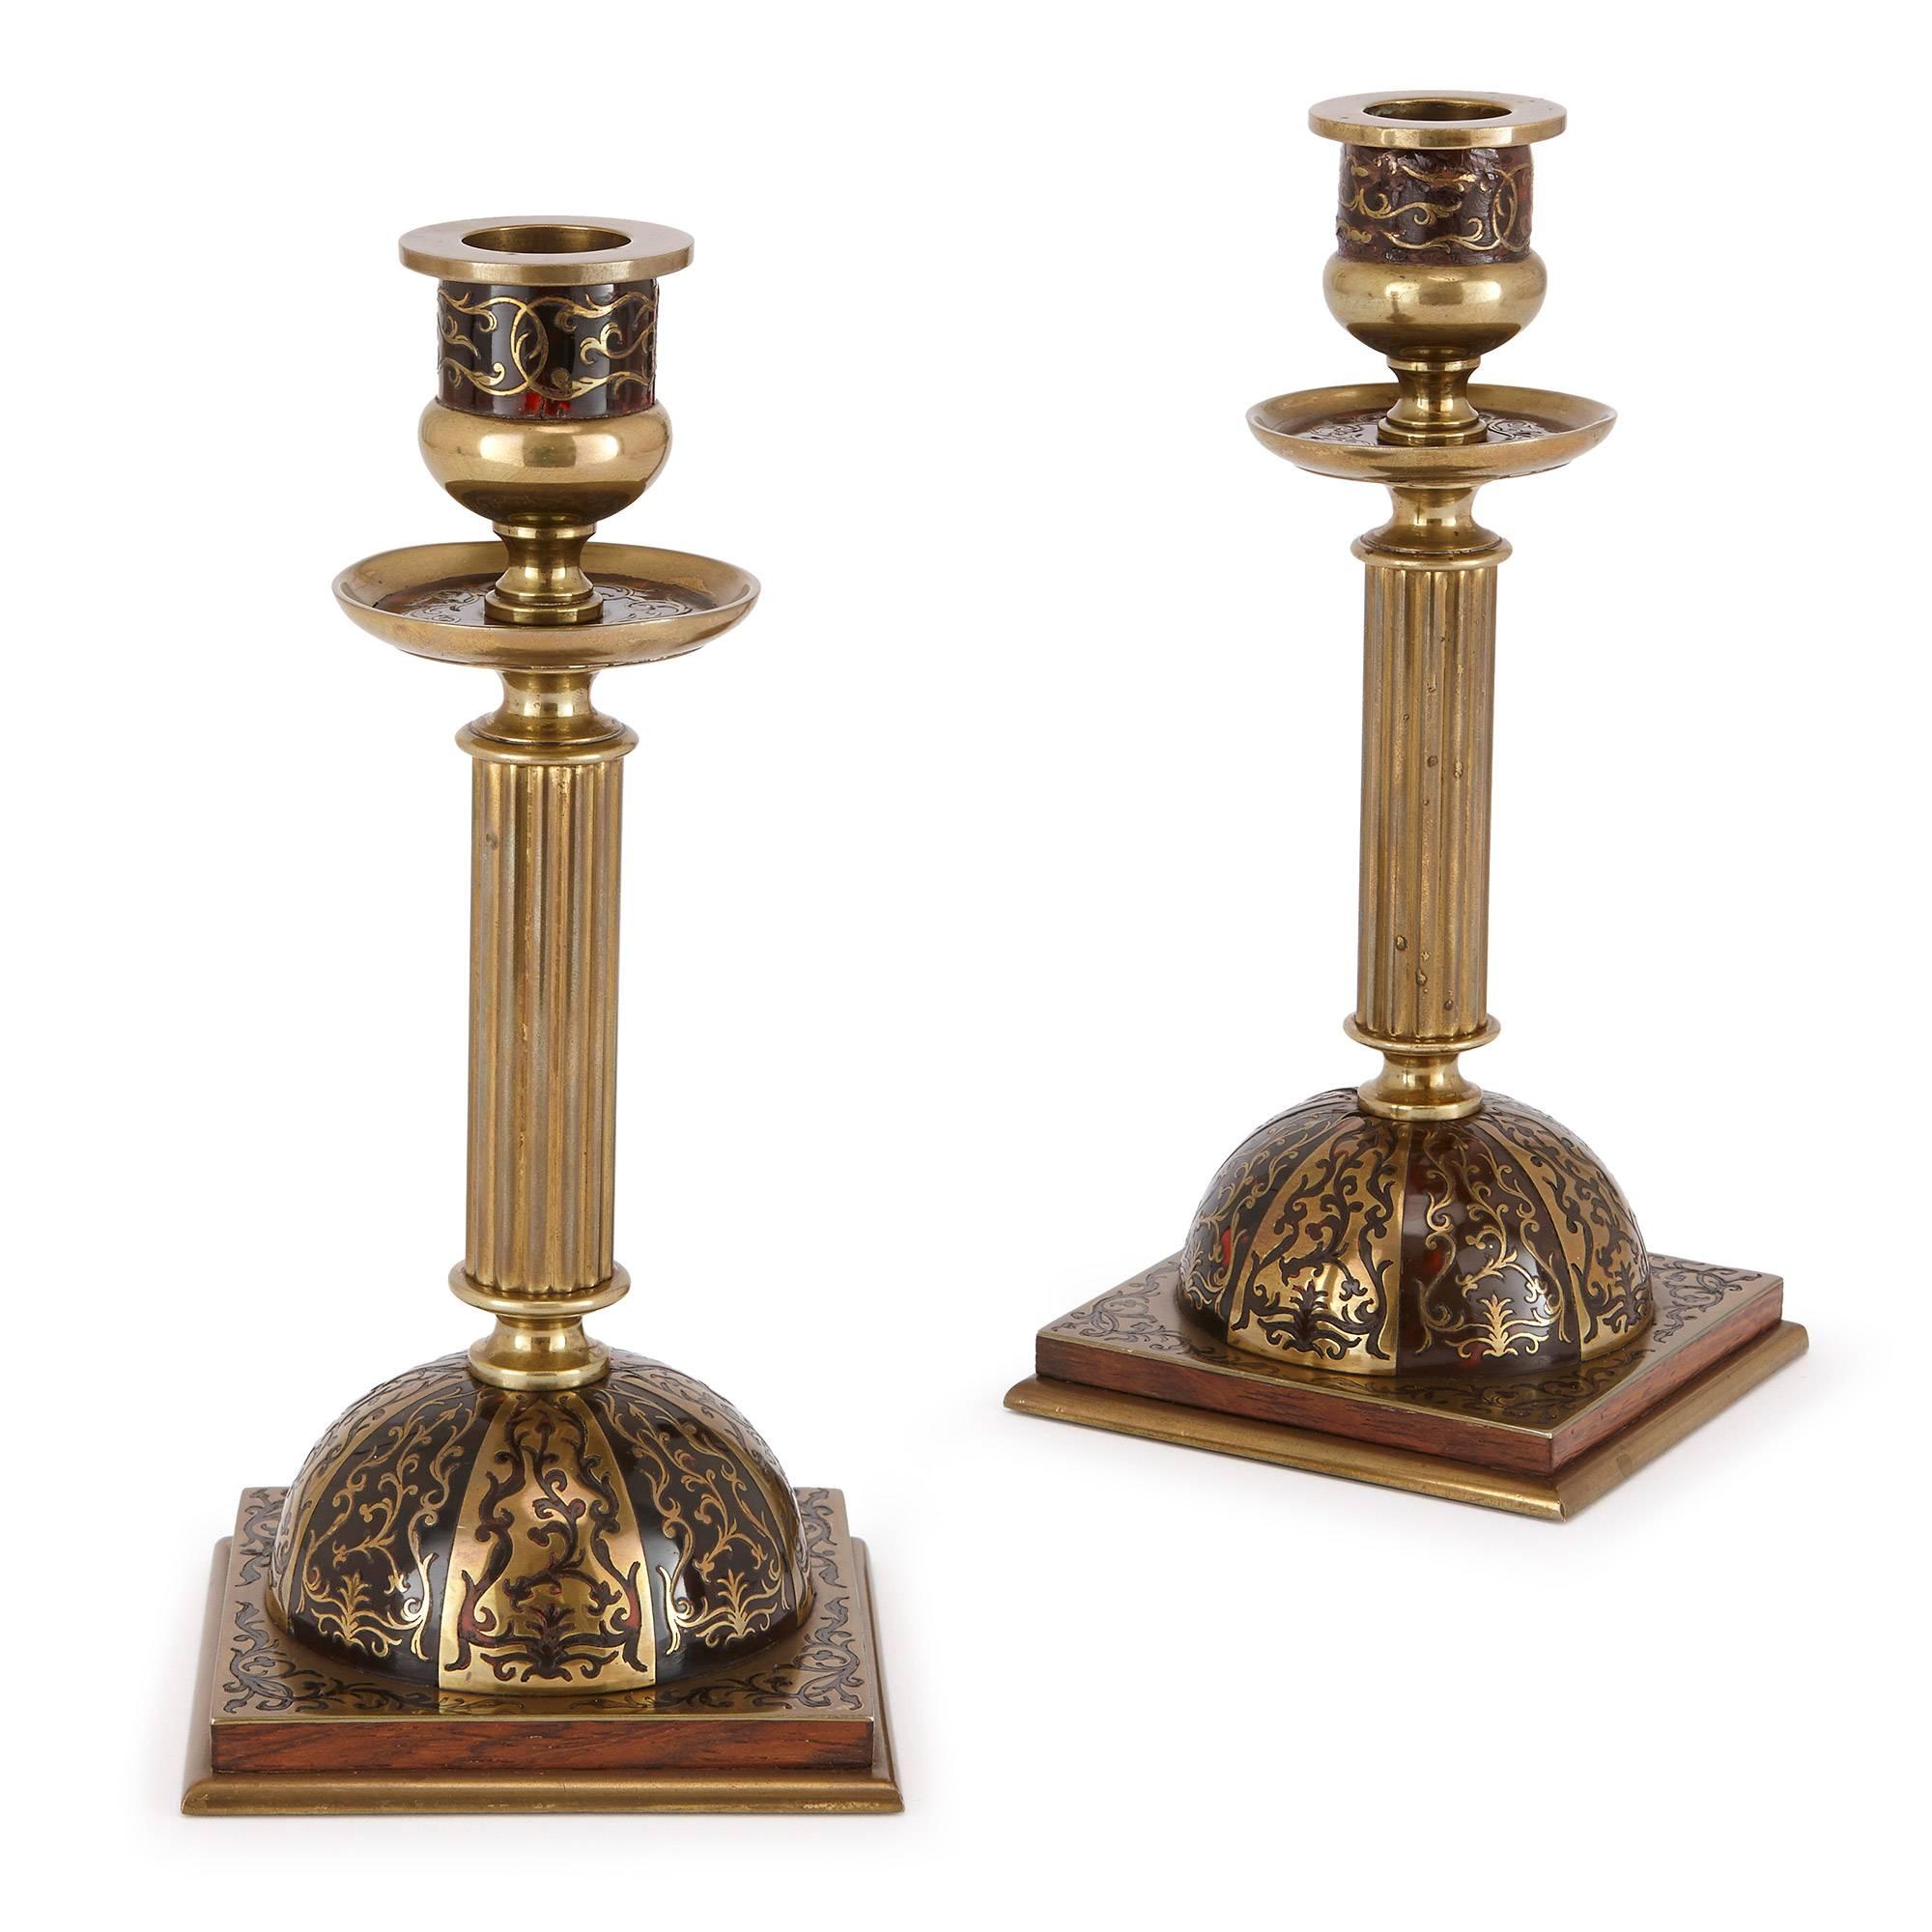 This fine pair of brass candlesticks are masterfully cast, with decorations in the style of French cabinetmaker Andre Charles Boulle. The candlesticks are set into semi-spheres on square bases, which are decorated in alternate styles of marquetry: